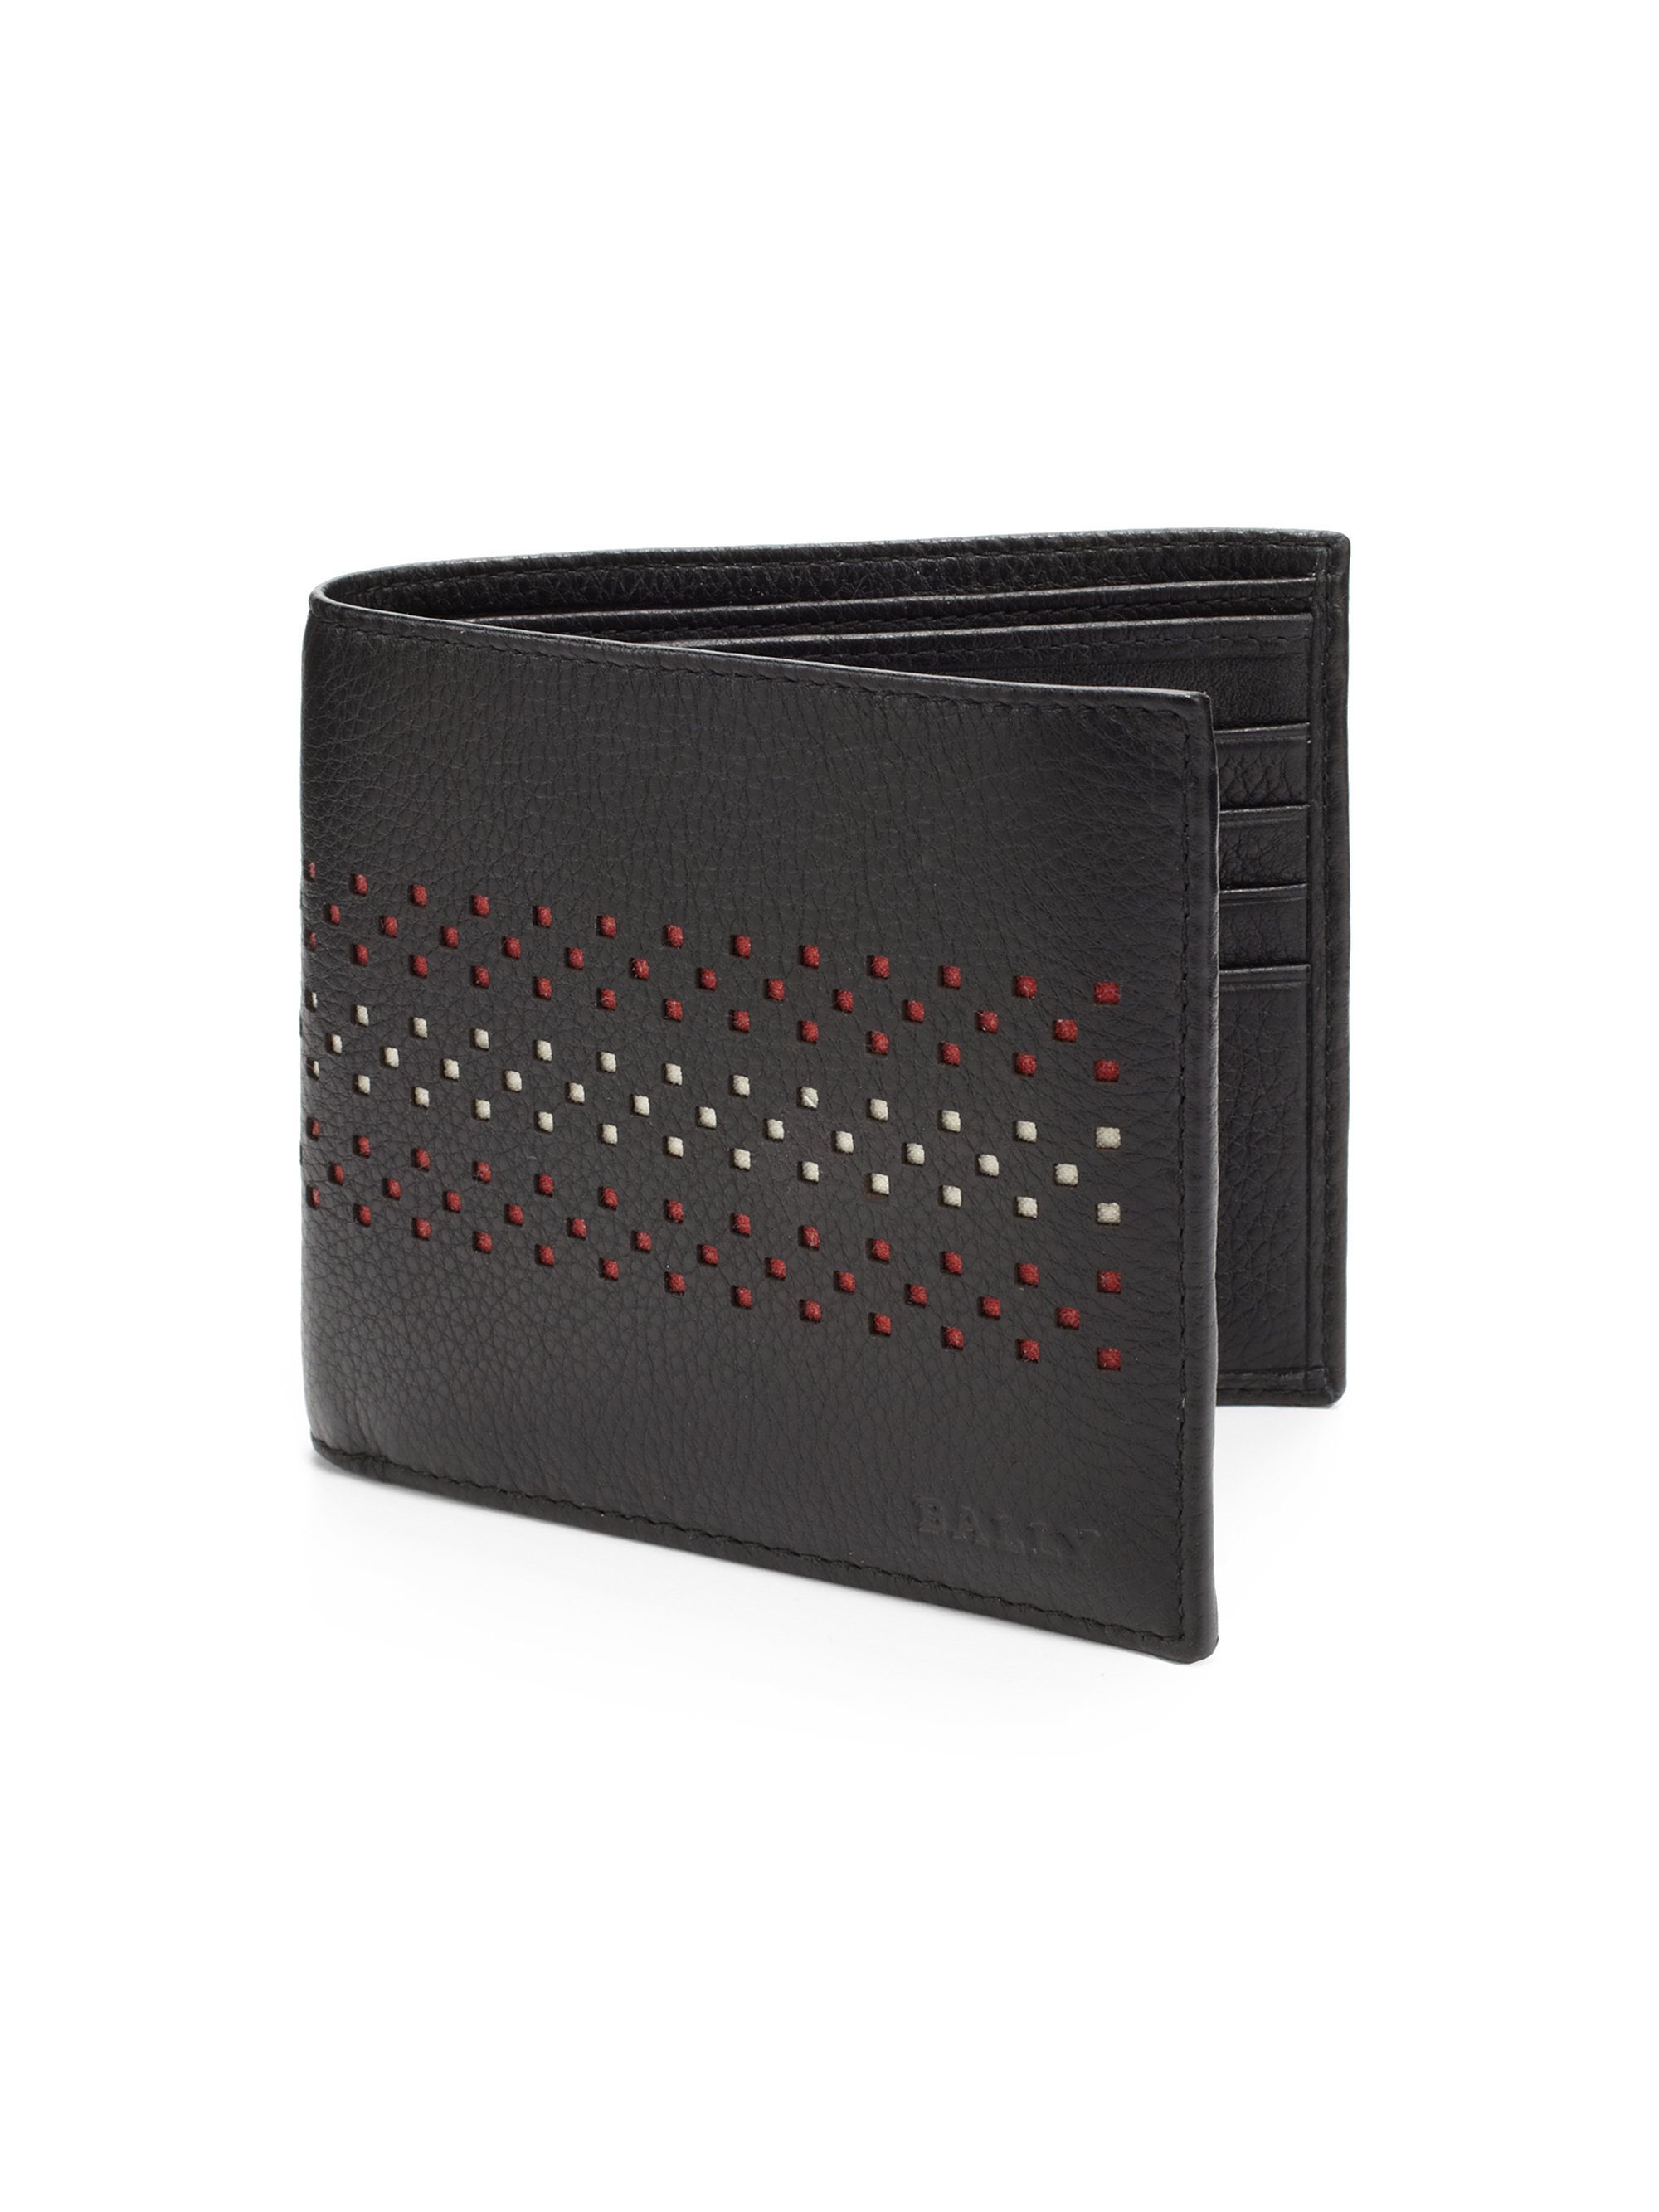 Lyst - Bally Vollen Perforated Leather Wallet in Black for Men